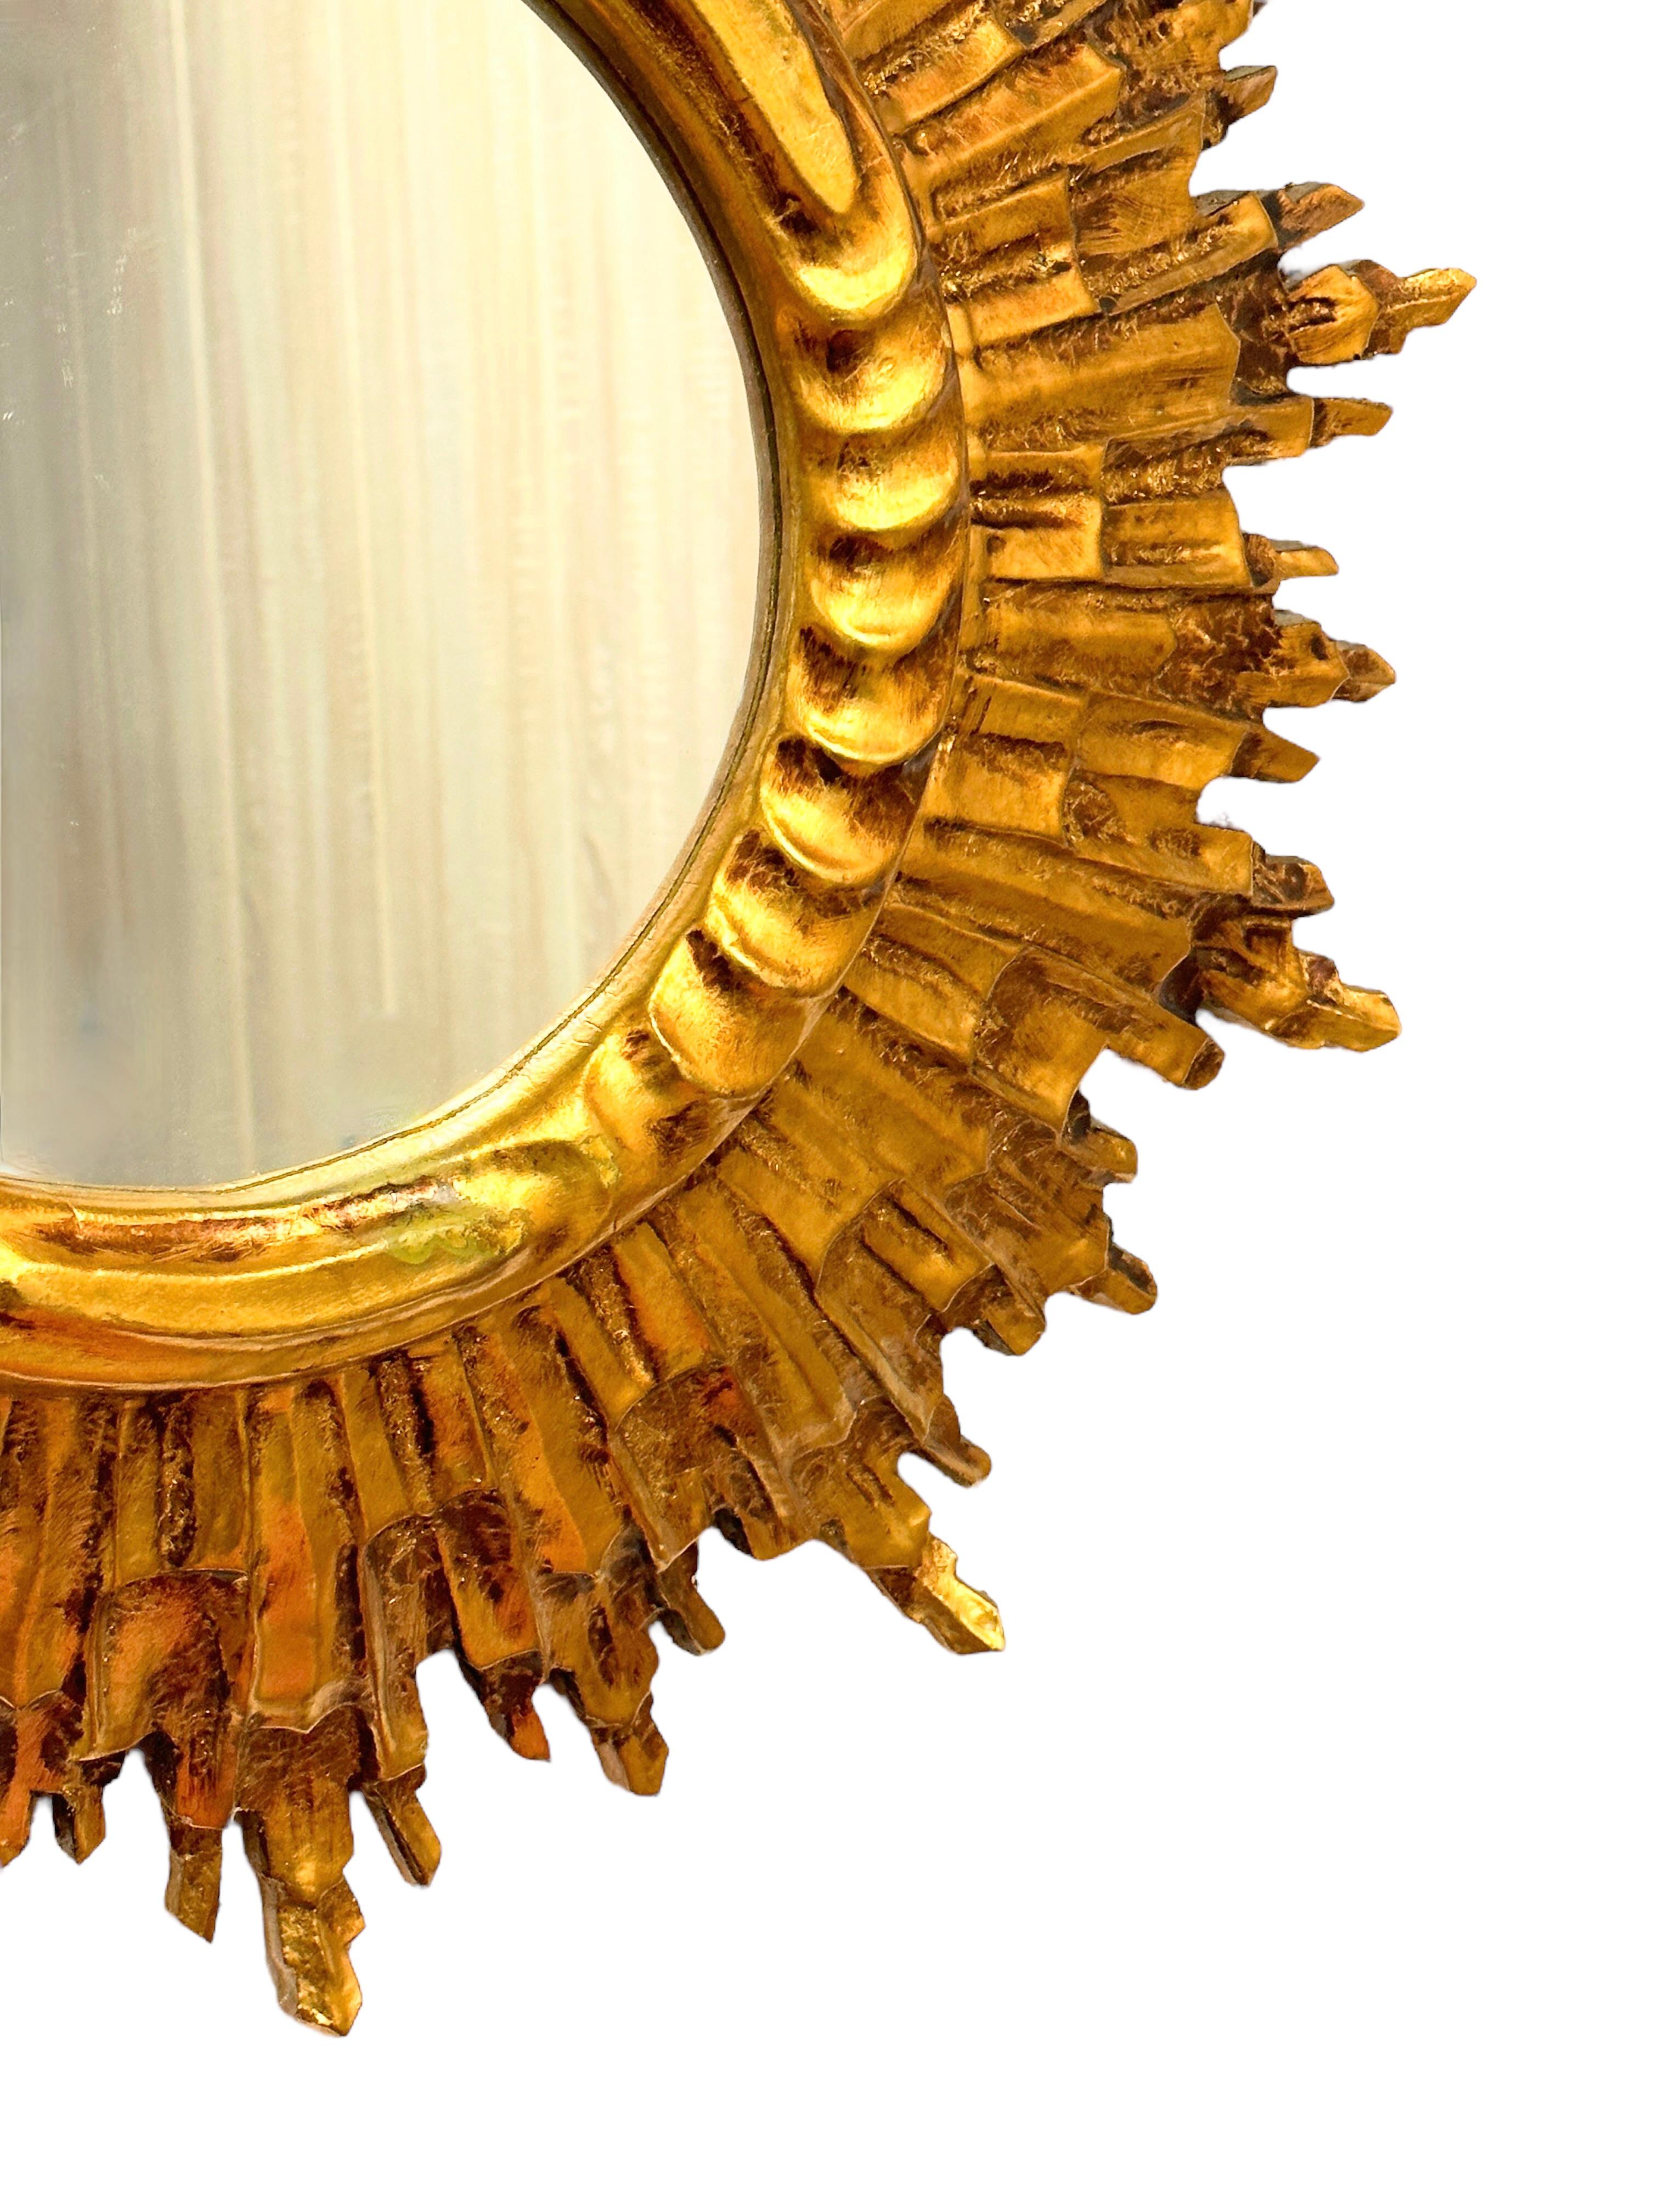 A gorgeous sunburst or starburst mirror. Made of gilded wood. It measures approximate: 24